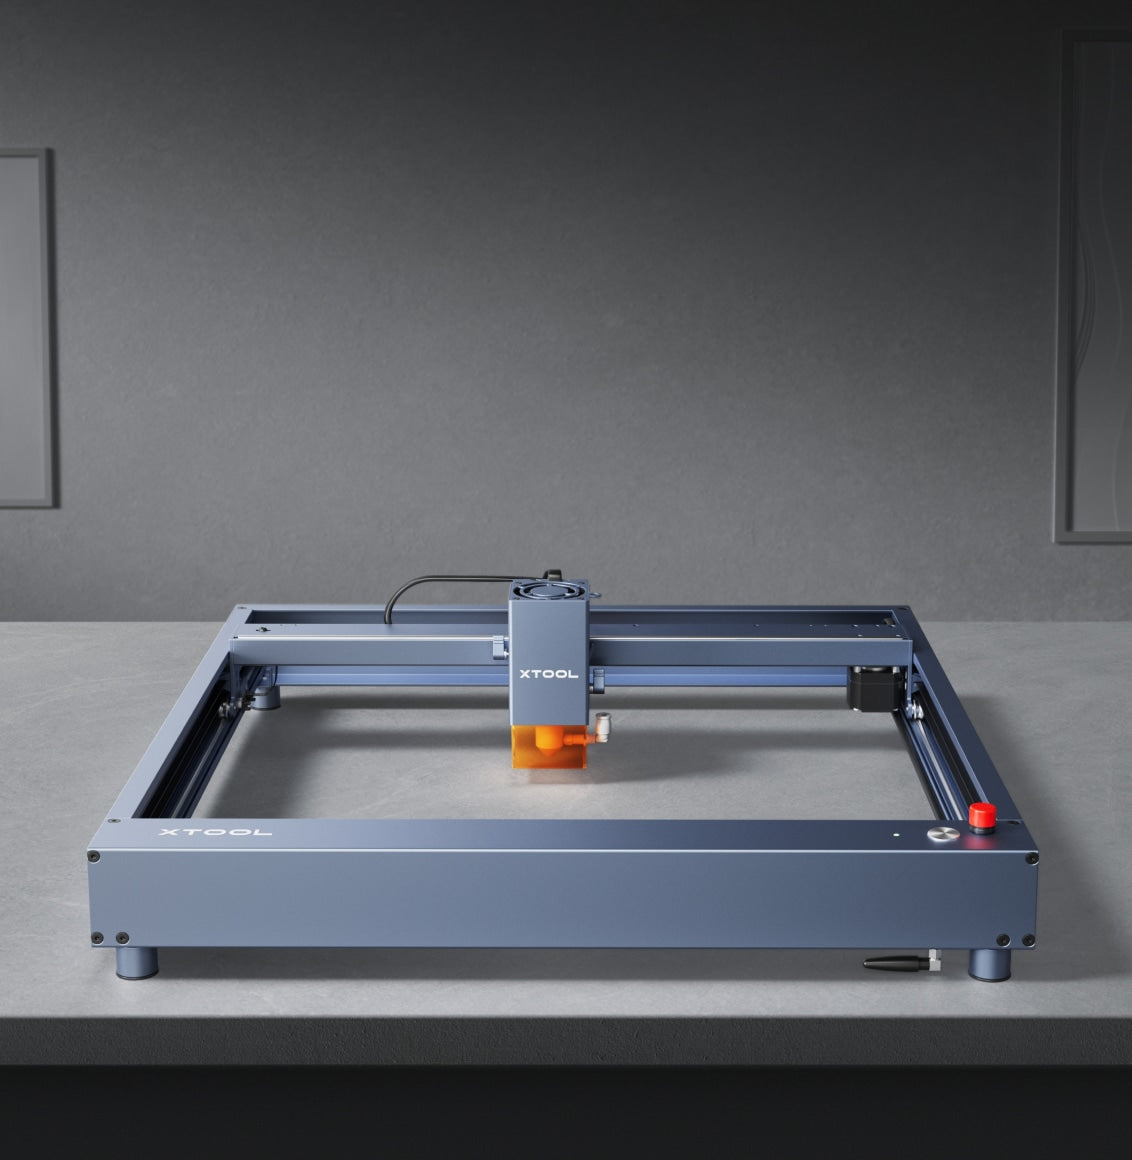 xTool D1 Pro 2.0 laser engraver and cutter